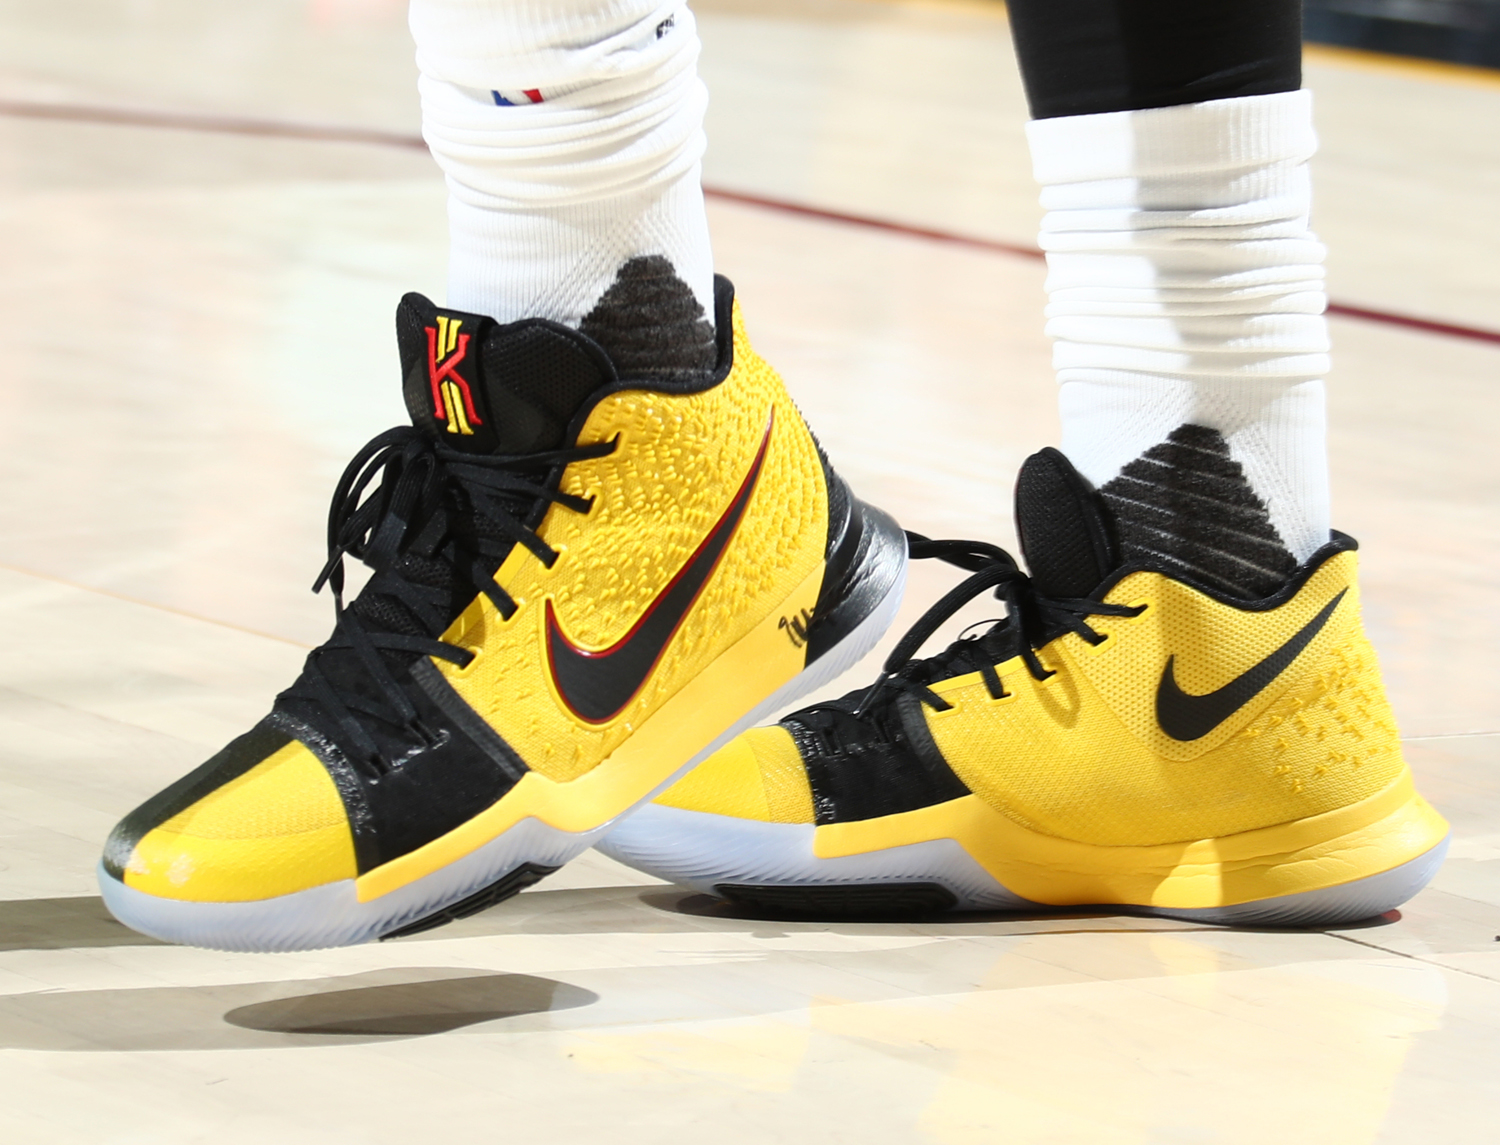 Kyrie Irving Clothing Lebron Shoes For Sale - Kyrie 3 Shoes Bruce Lee - HD Wallpaper 